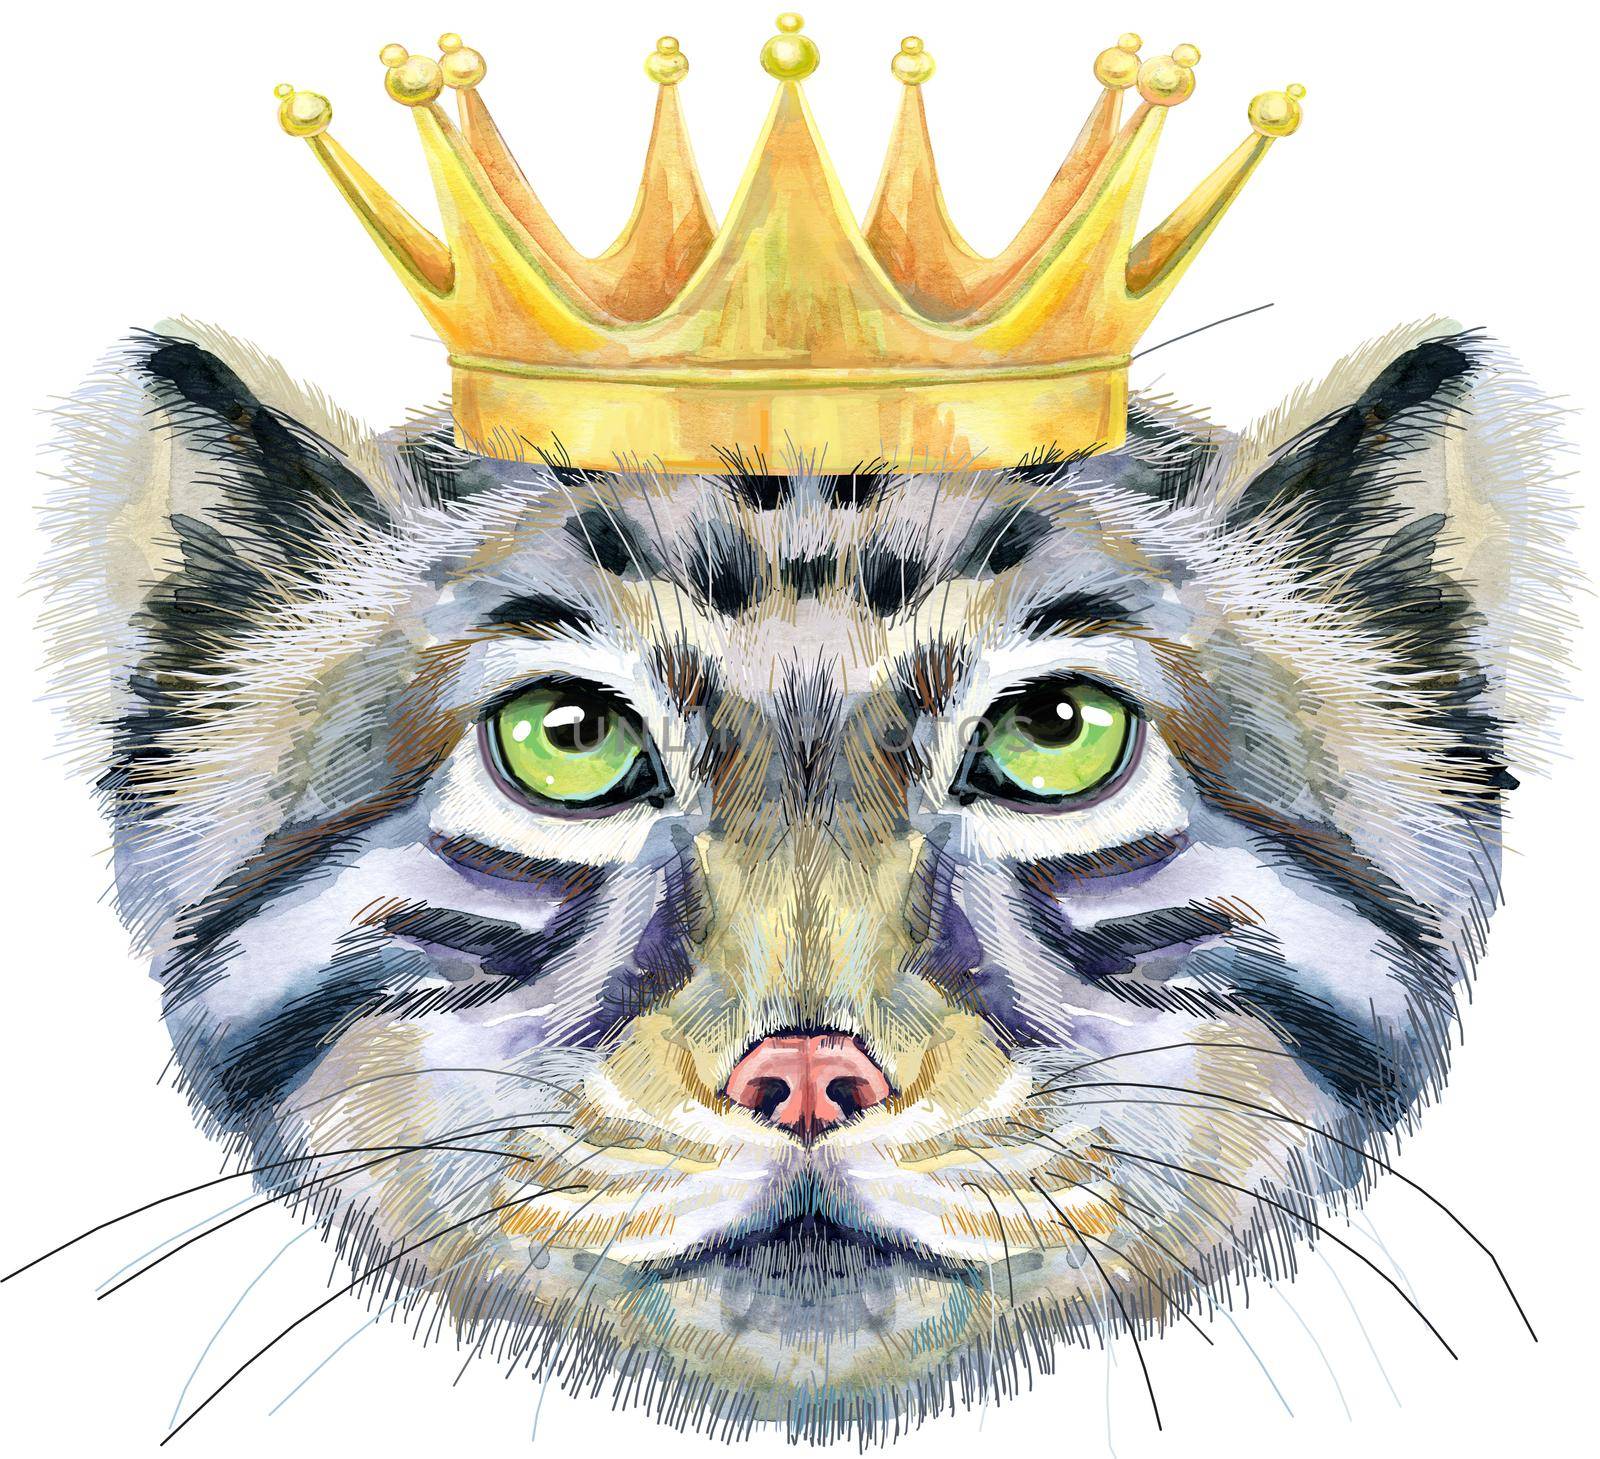 Watercolor portrait of a Manul Cat in golden crown on white background by NataOmsk